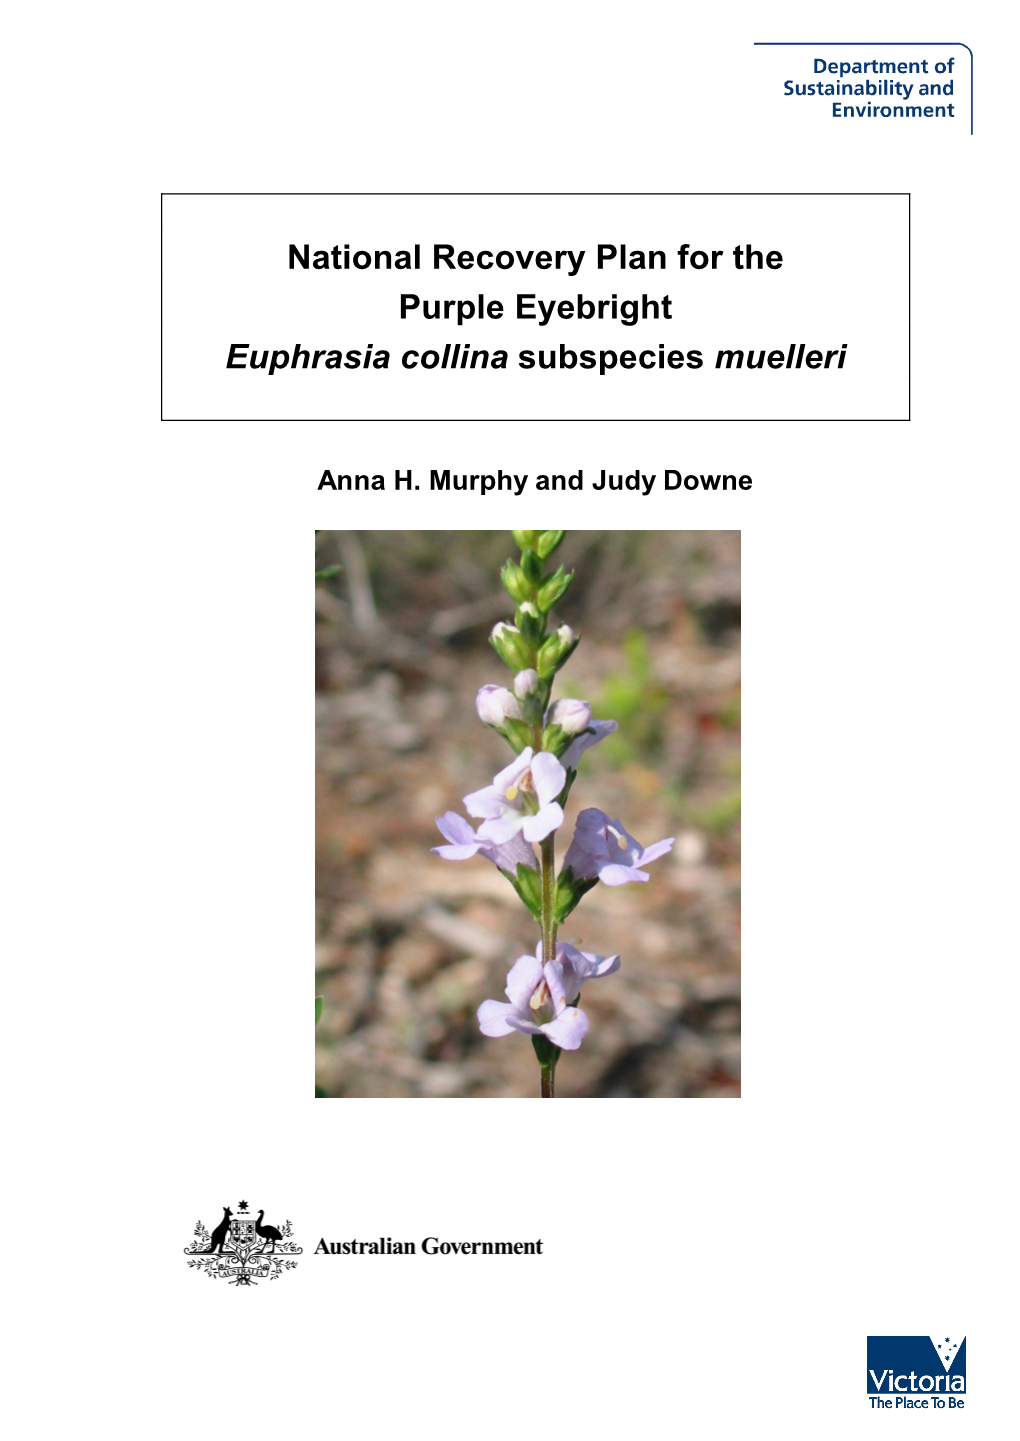 National Recovery Plan for the Purple Eyebright Euphrasia Collina Subspecies Muelleri